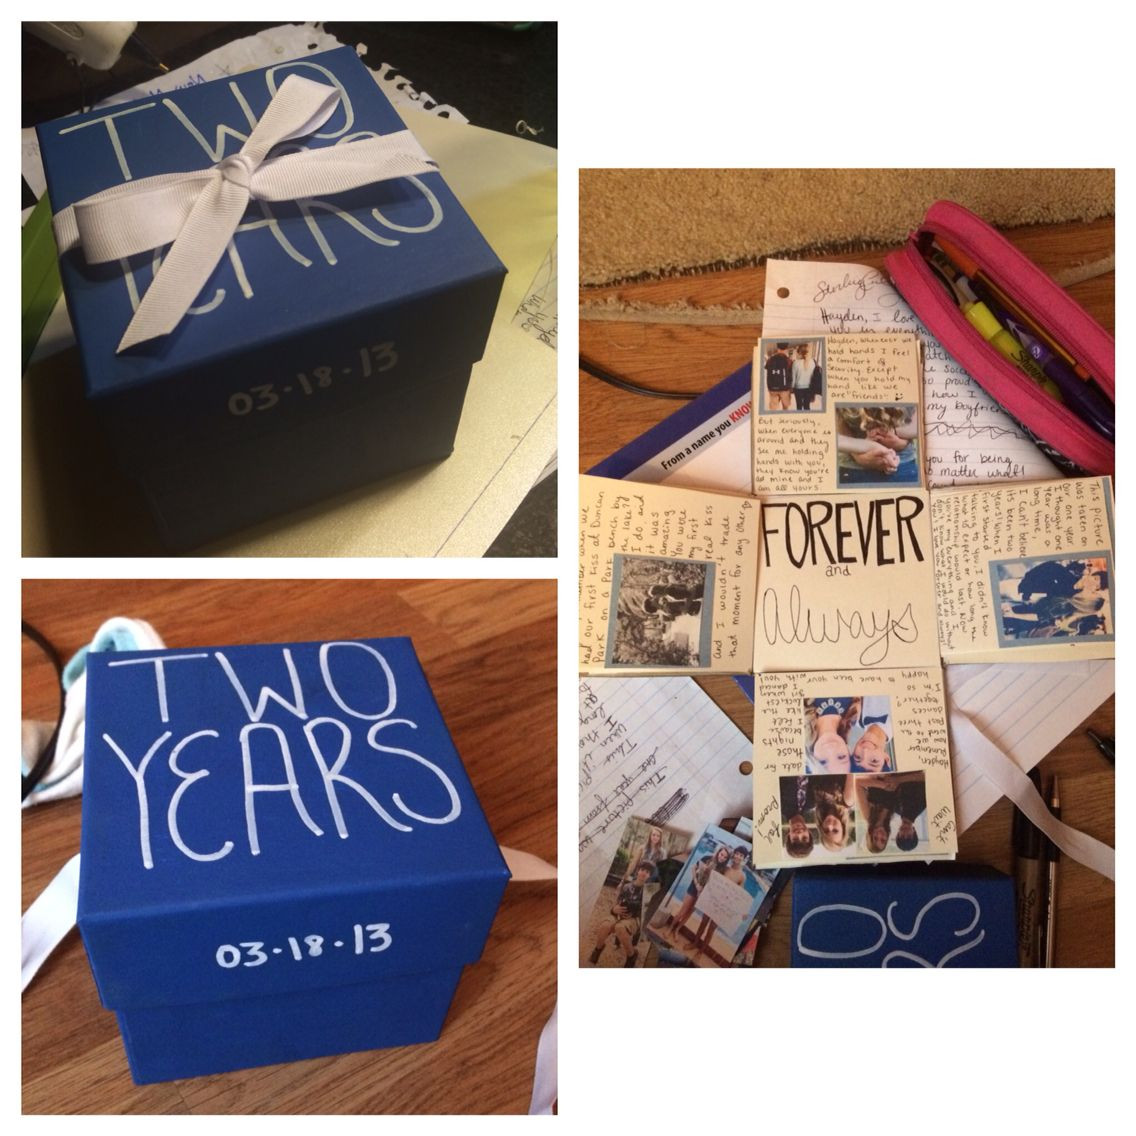 2 Year Anniversary Gift Ideas For Him
 Anniversary box For my boyfriend and I s 2 year I made